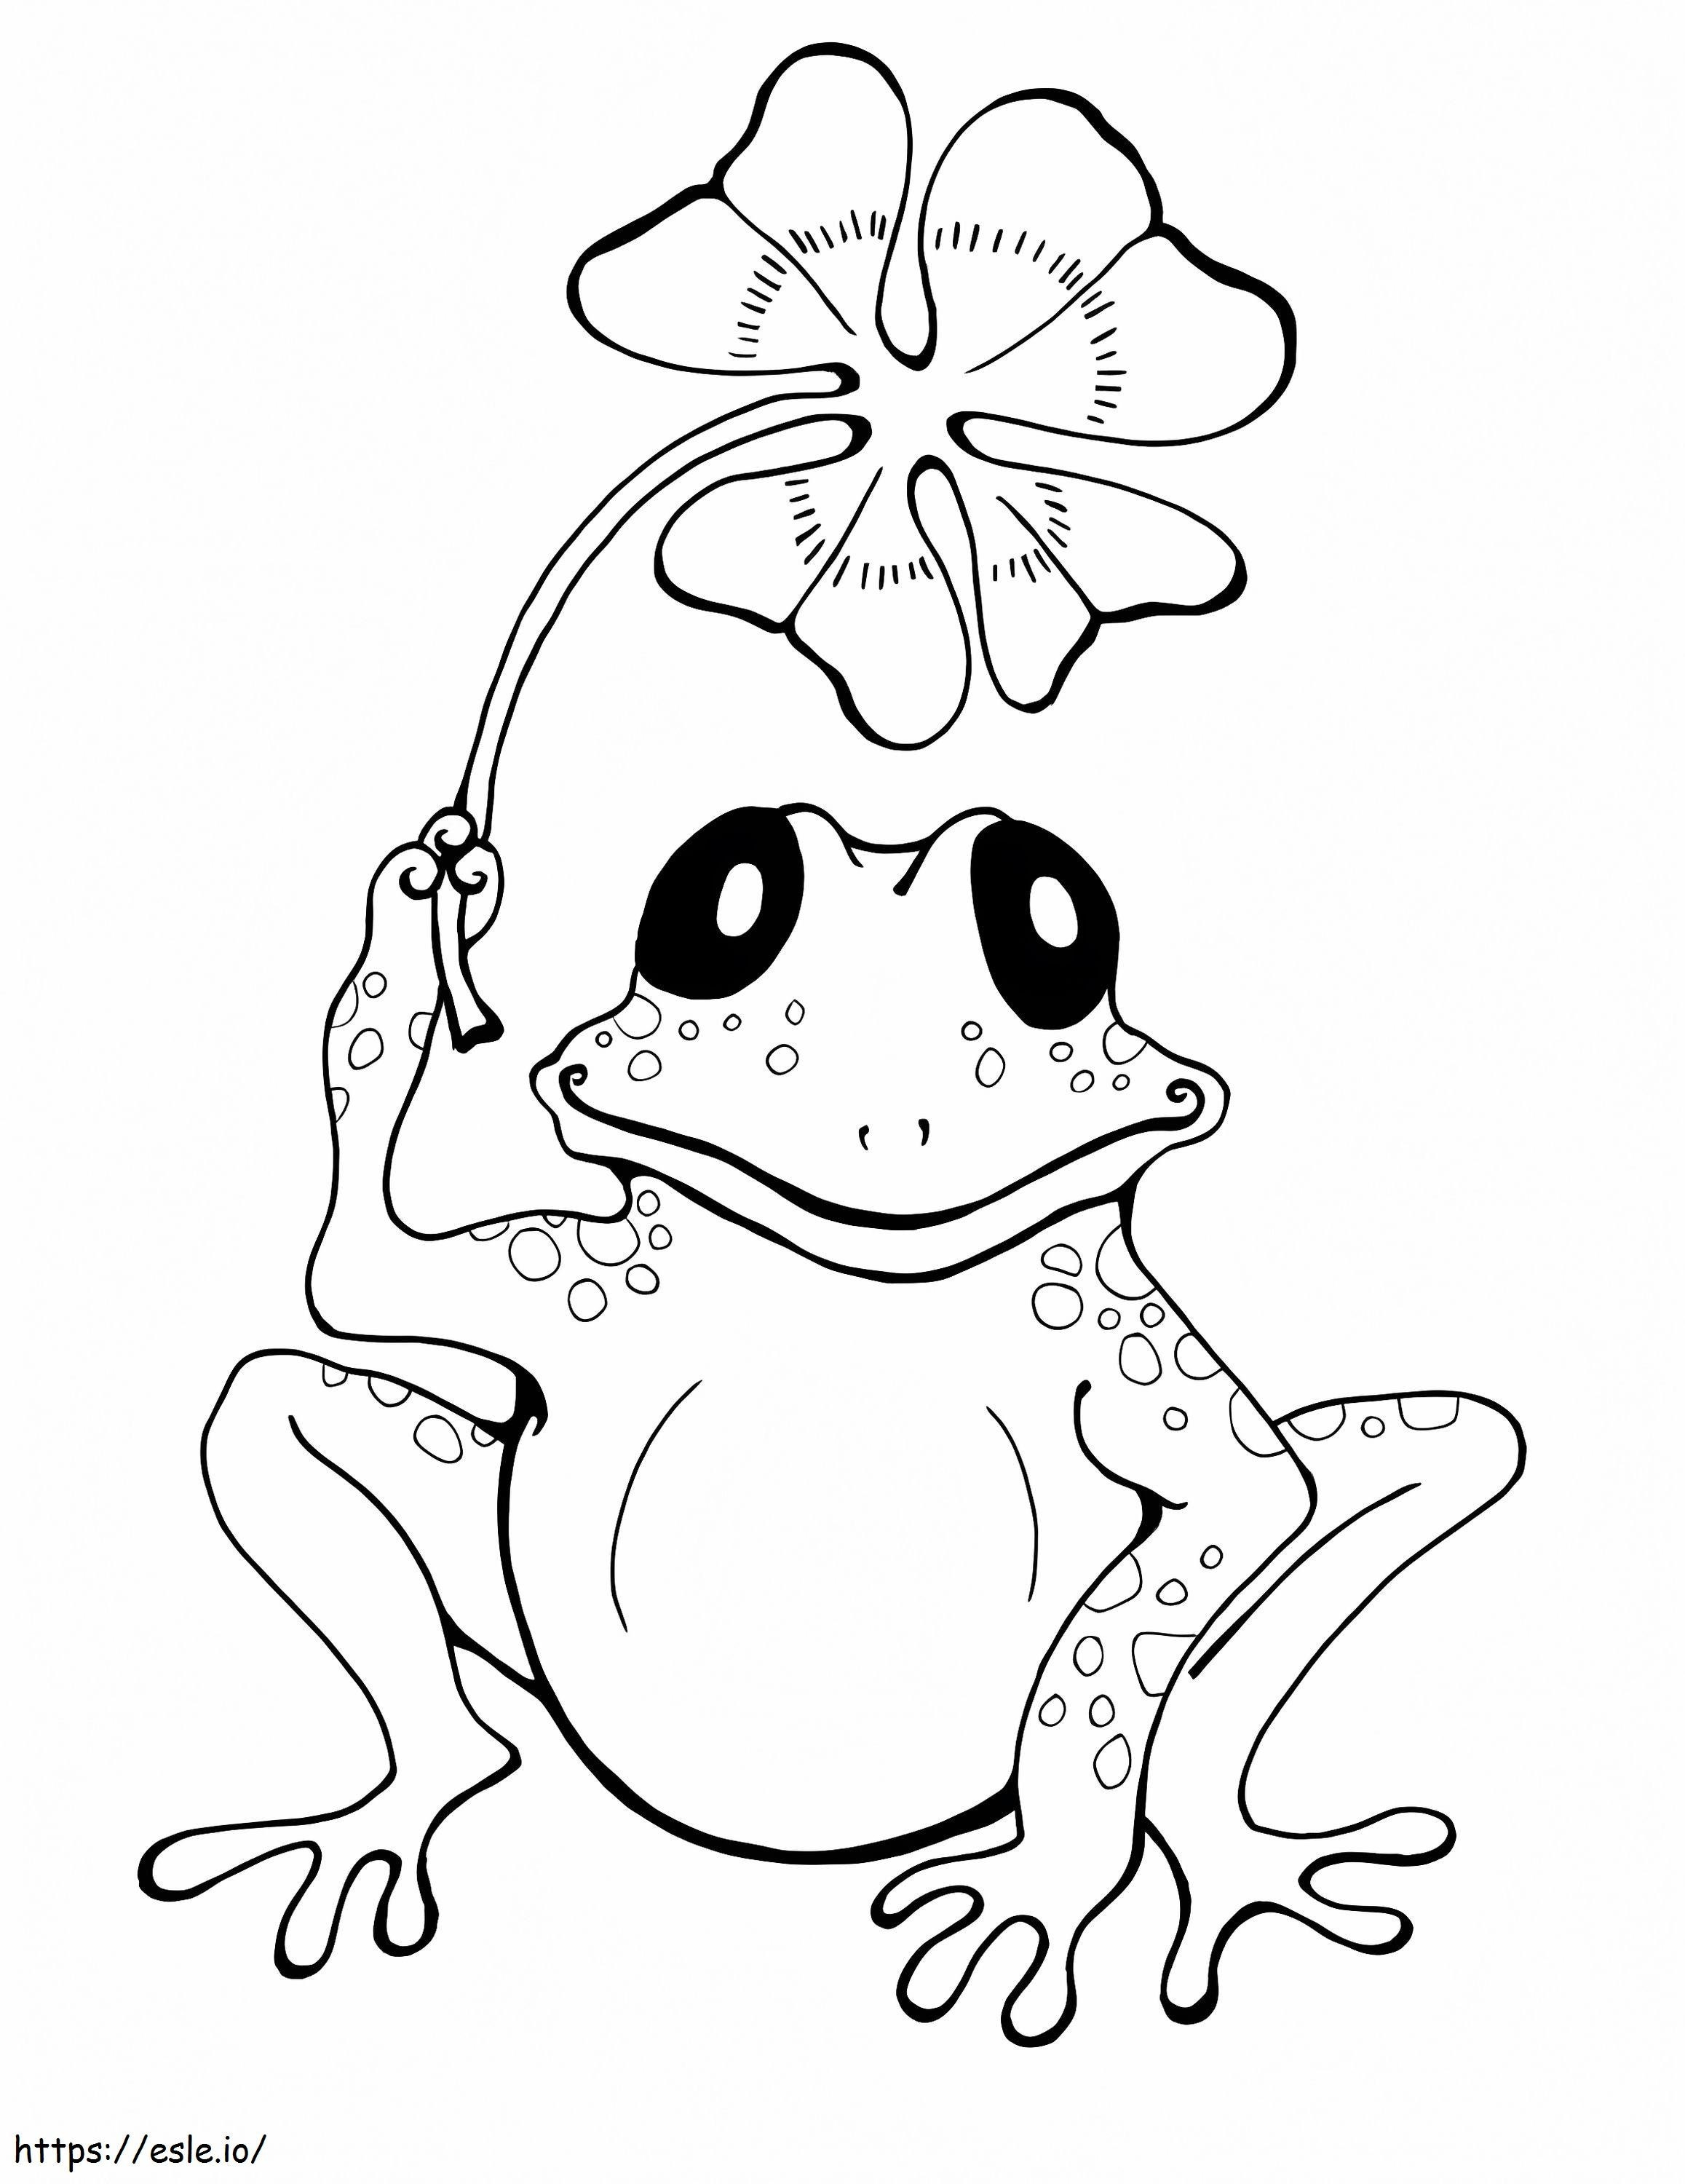 Frog Holding Clover coloring page